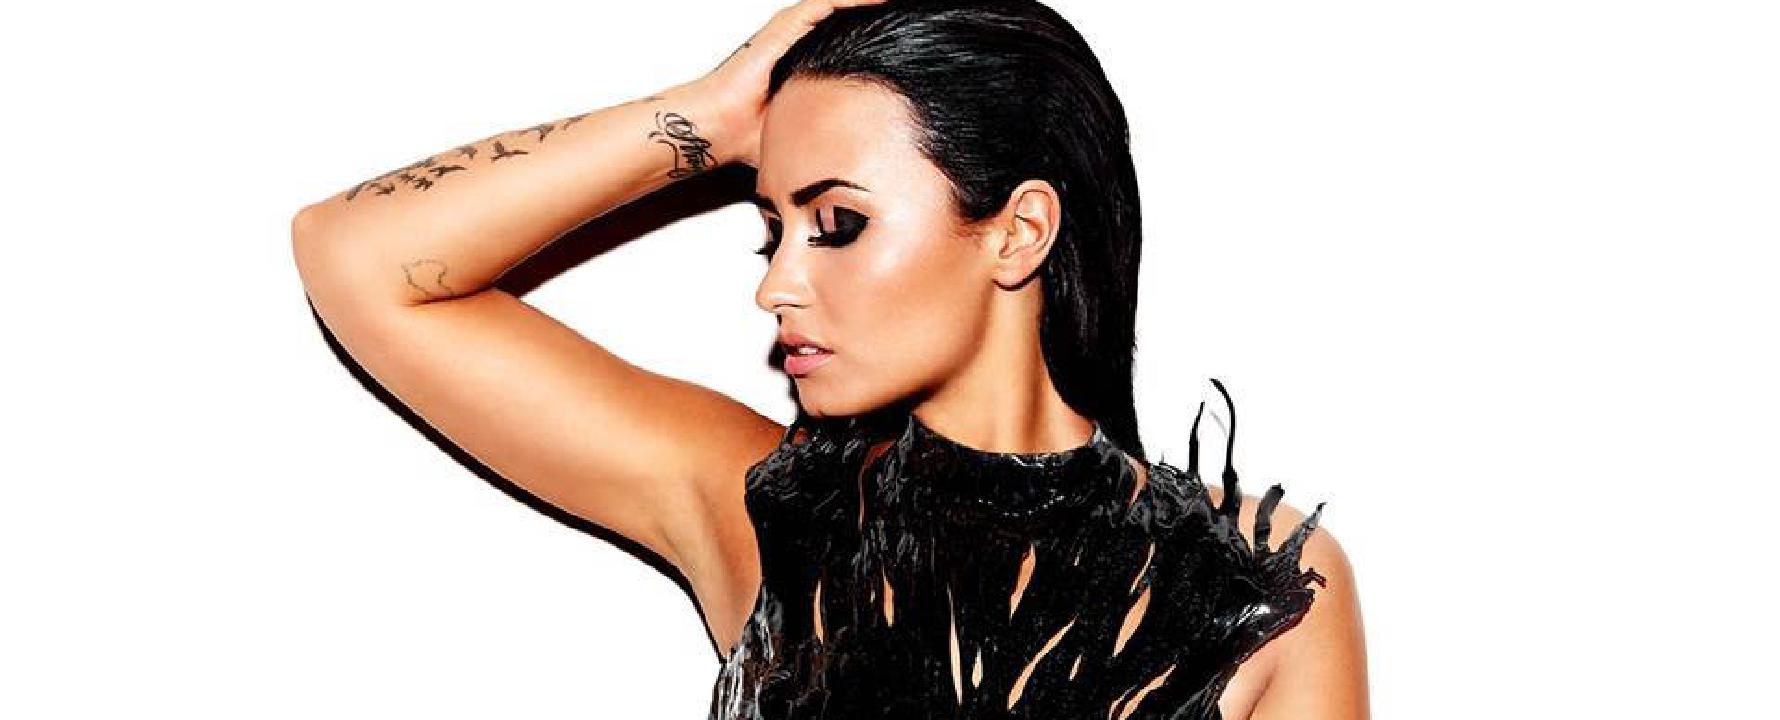 Promotional photograph of Demi Lovato.